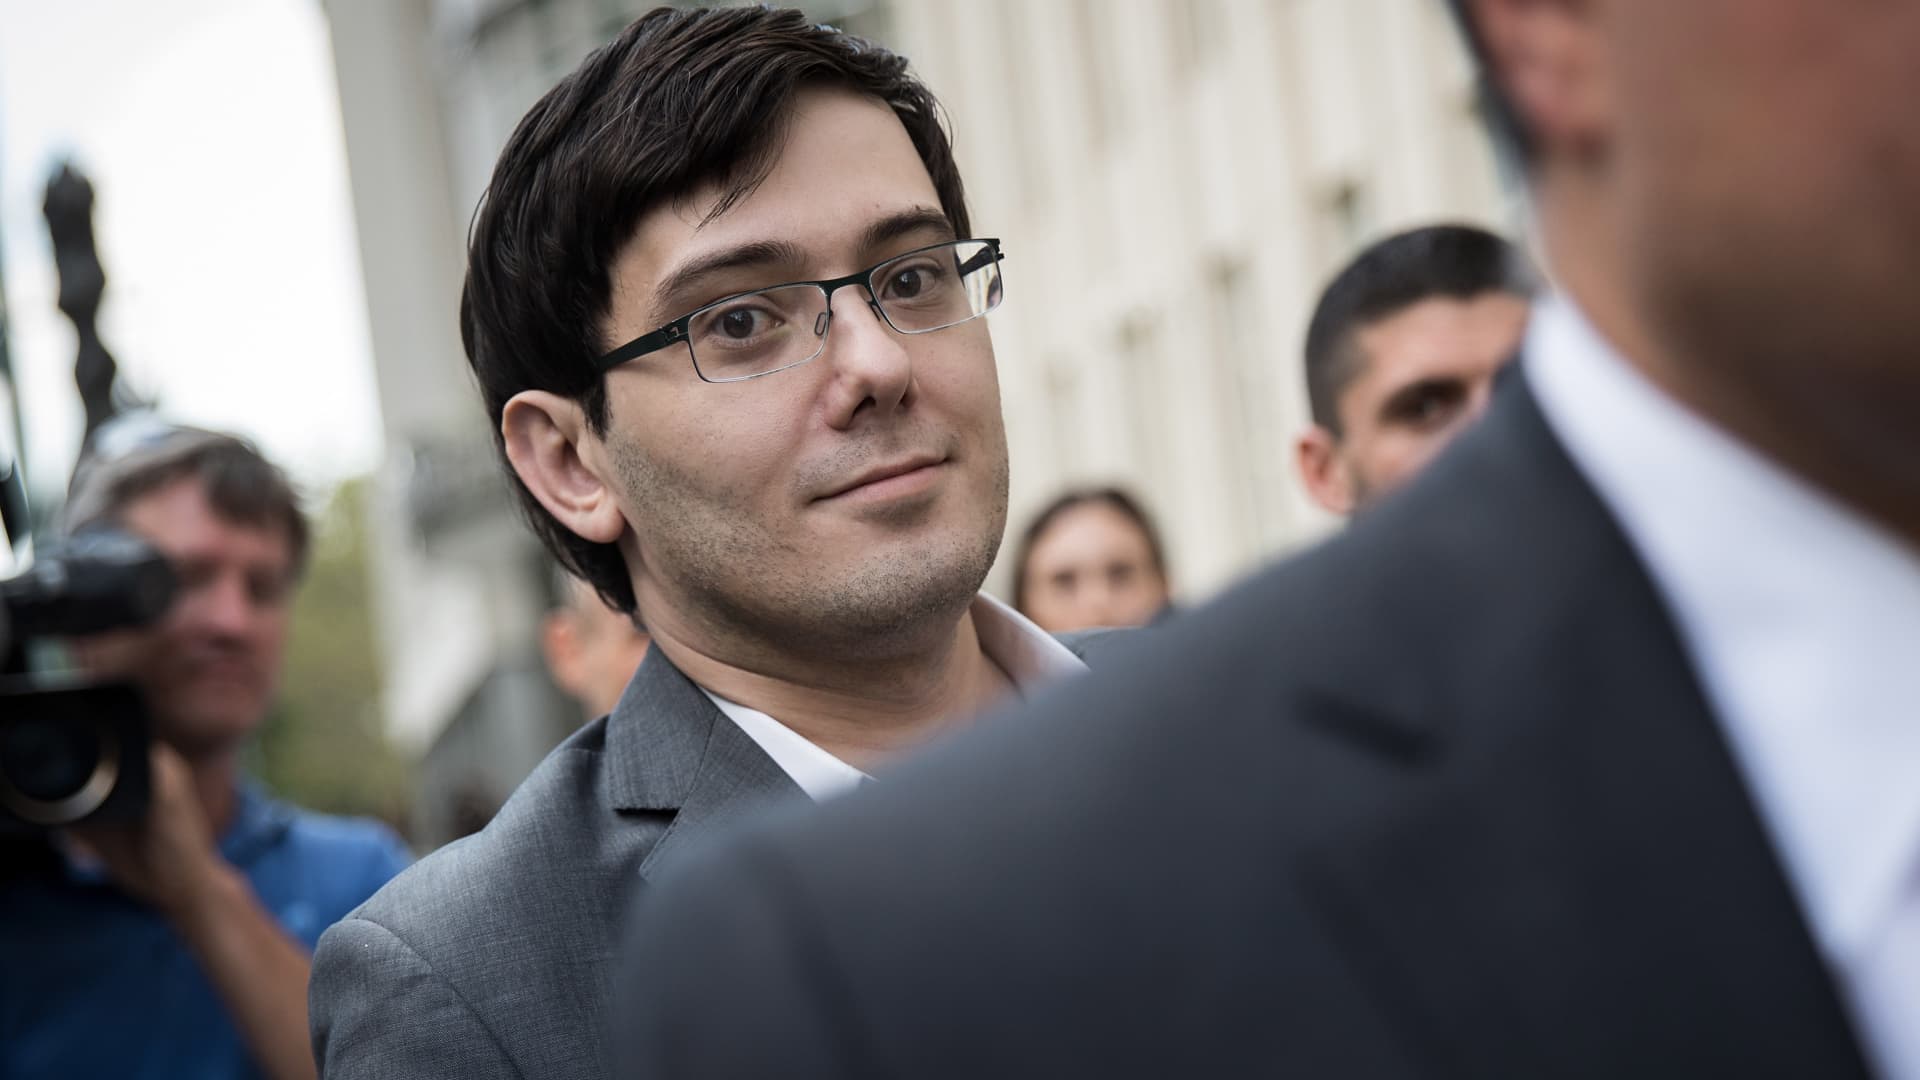 ‘Pharma bro’ Martin Shkreli released from federal prison and into New York halfway house – CNBC